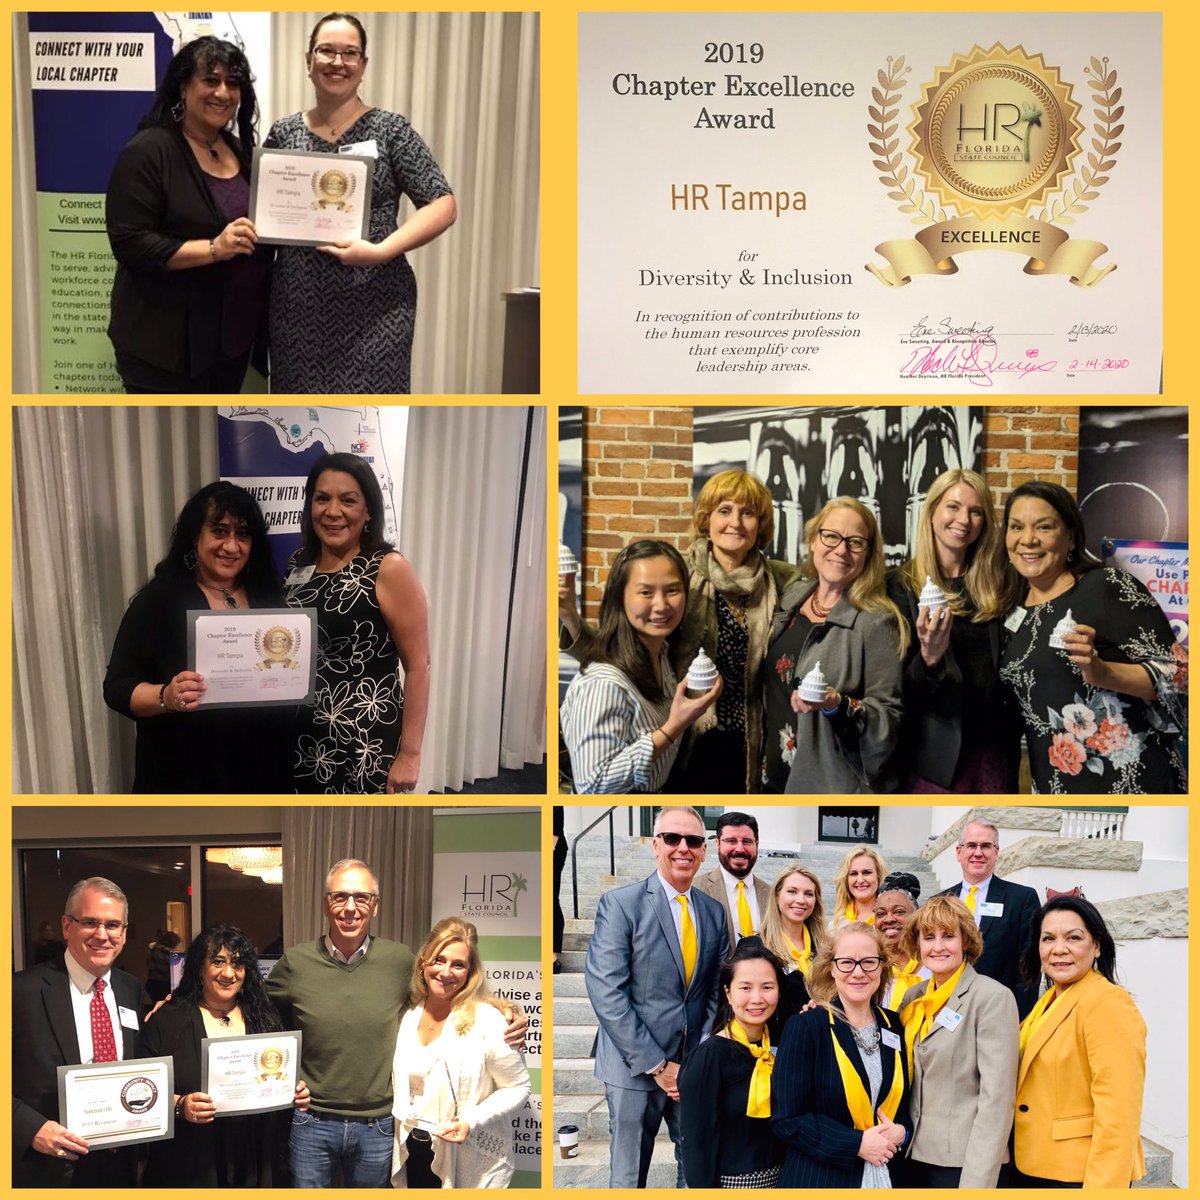 Congratulations to @HRTampa, @SuncoastHR and @SHRA_HRchapter  for making District 7 a powerhouse at @hrflorida council meeting! #sisterchapters #hrfllead #impact